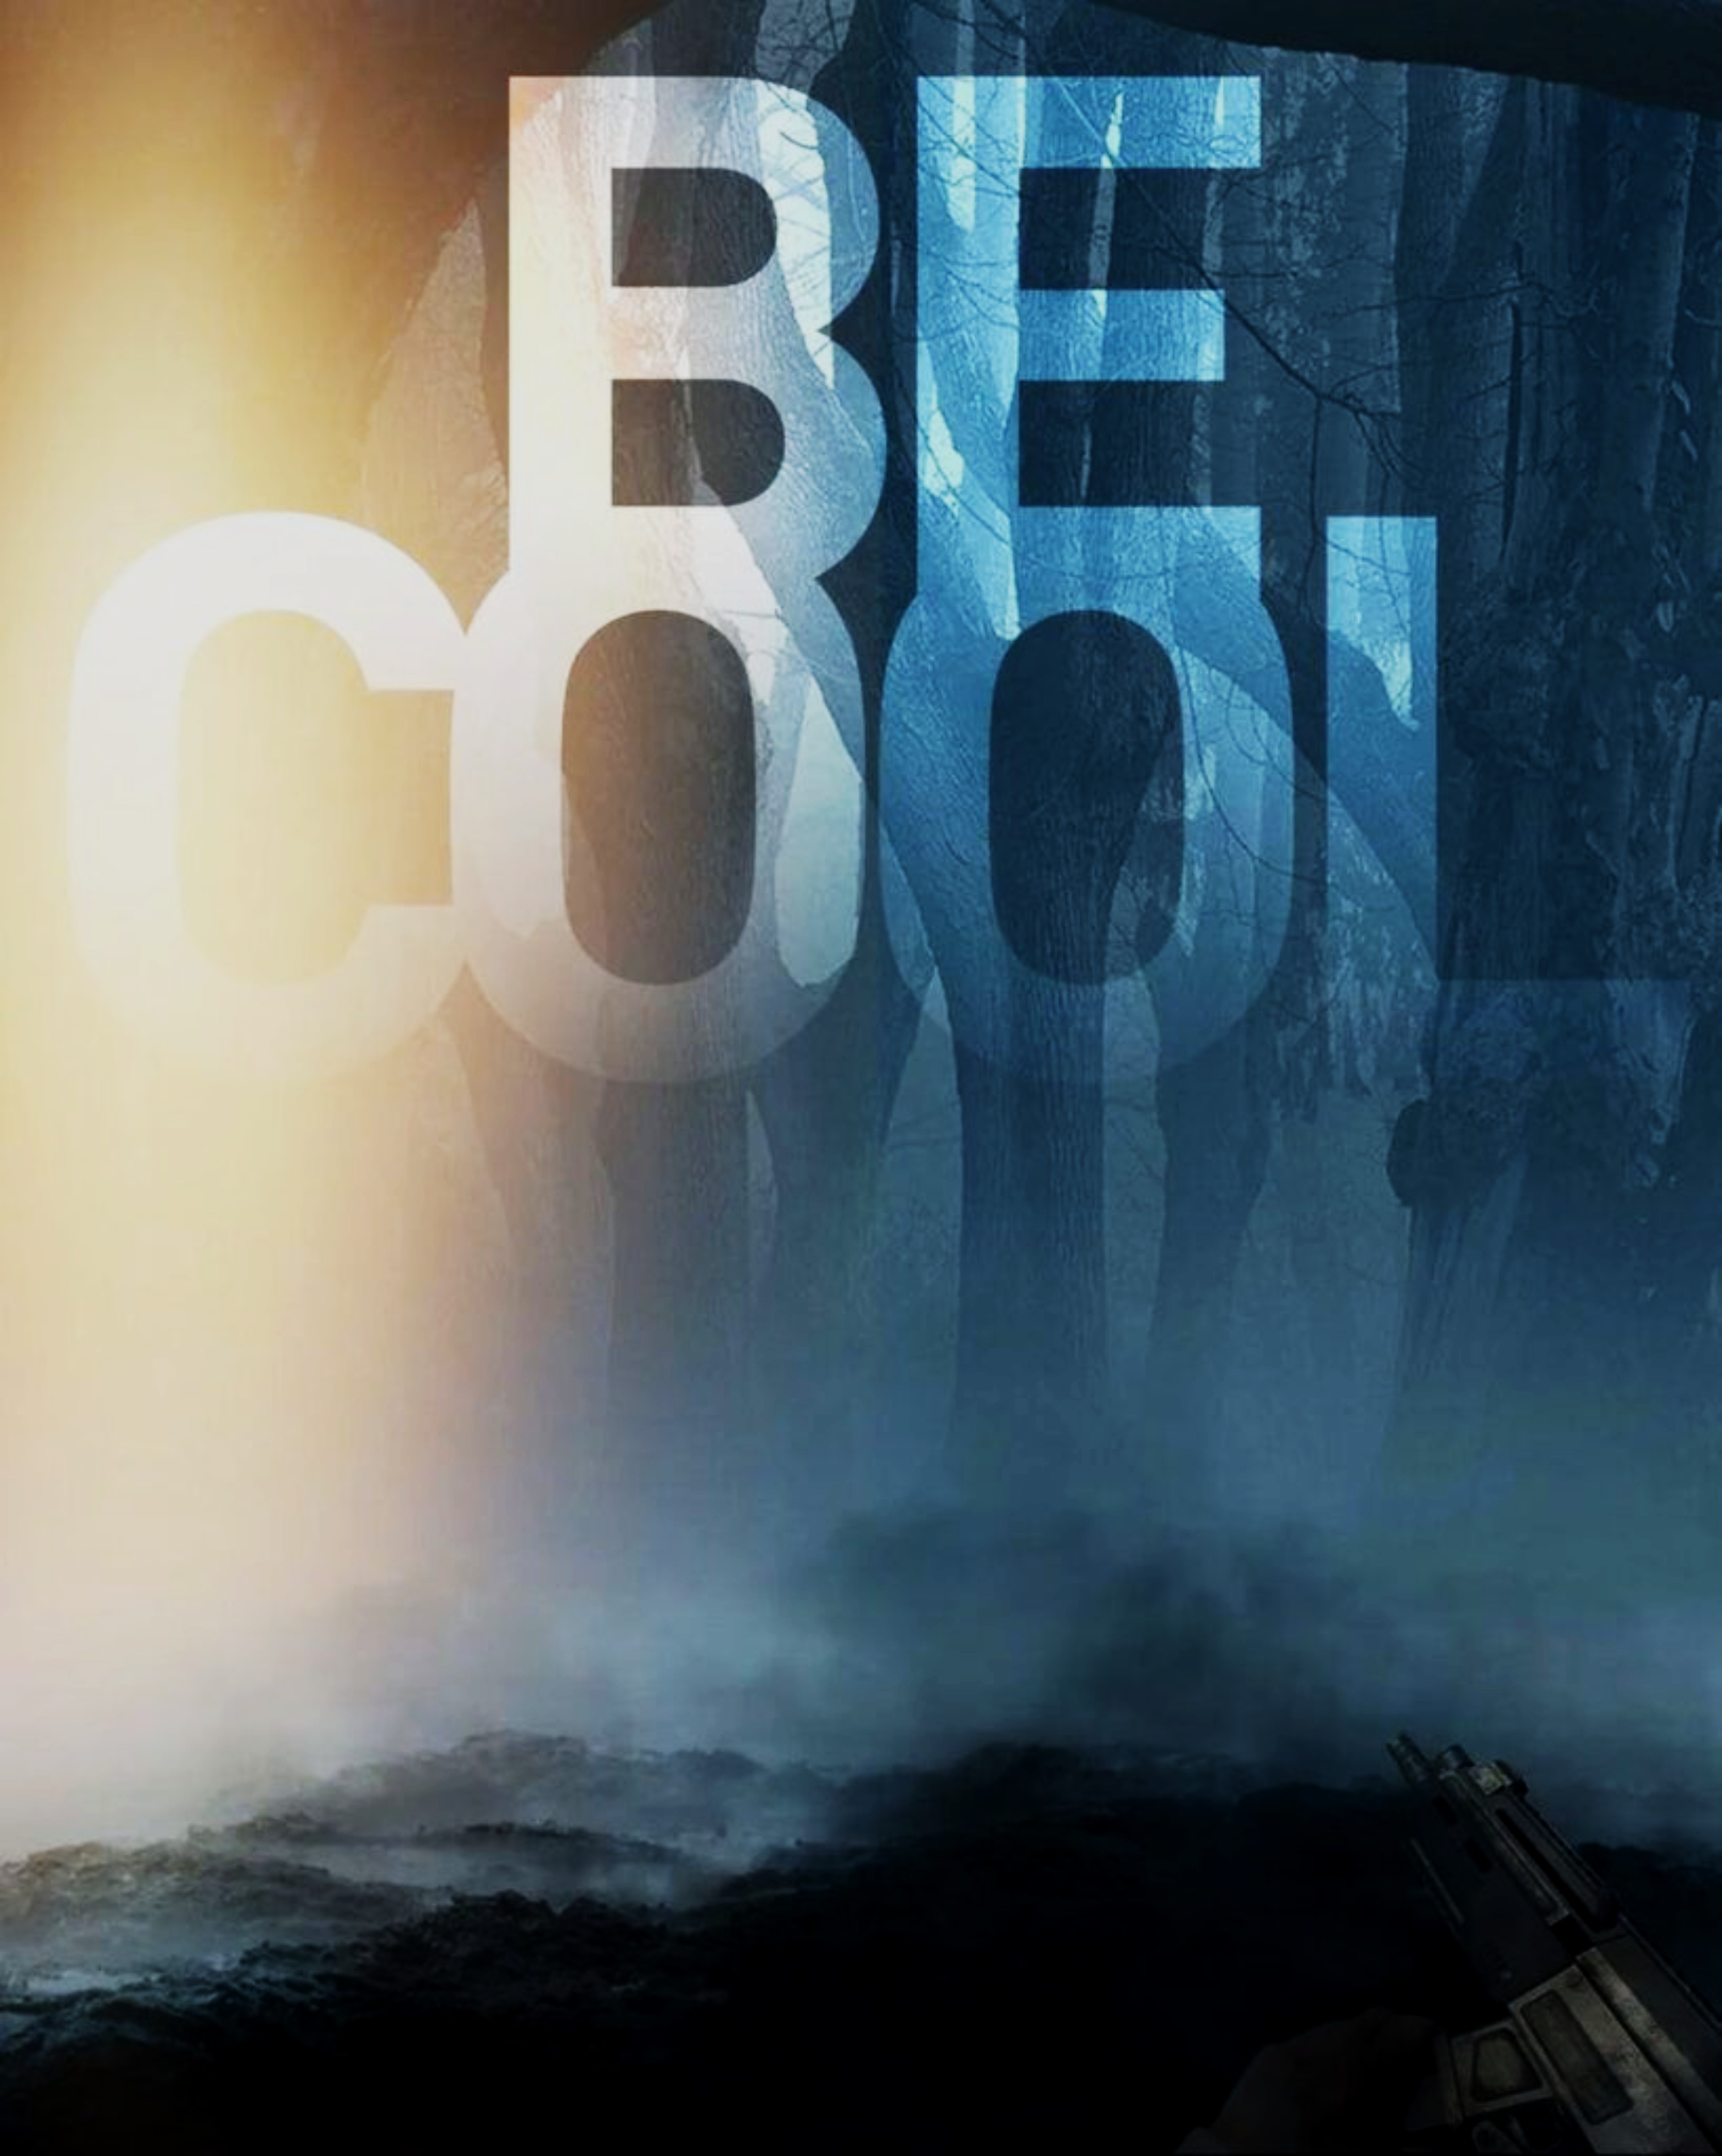 You are currently viewing Be cool image editing background download free